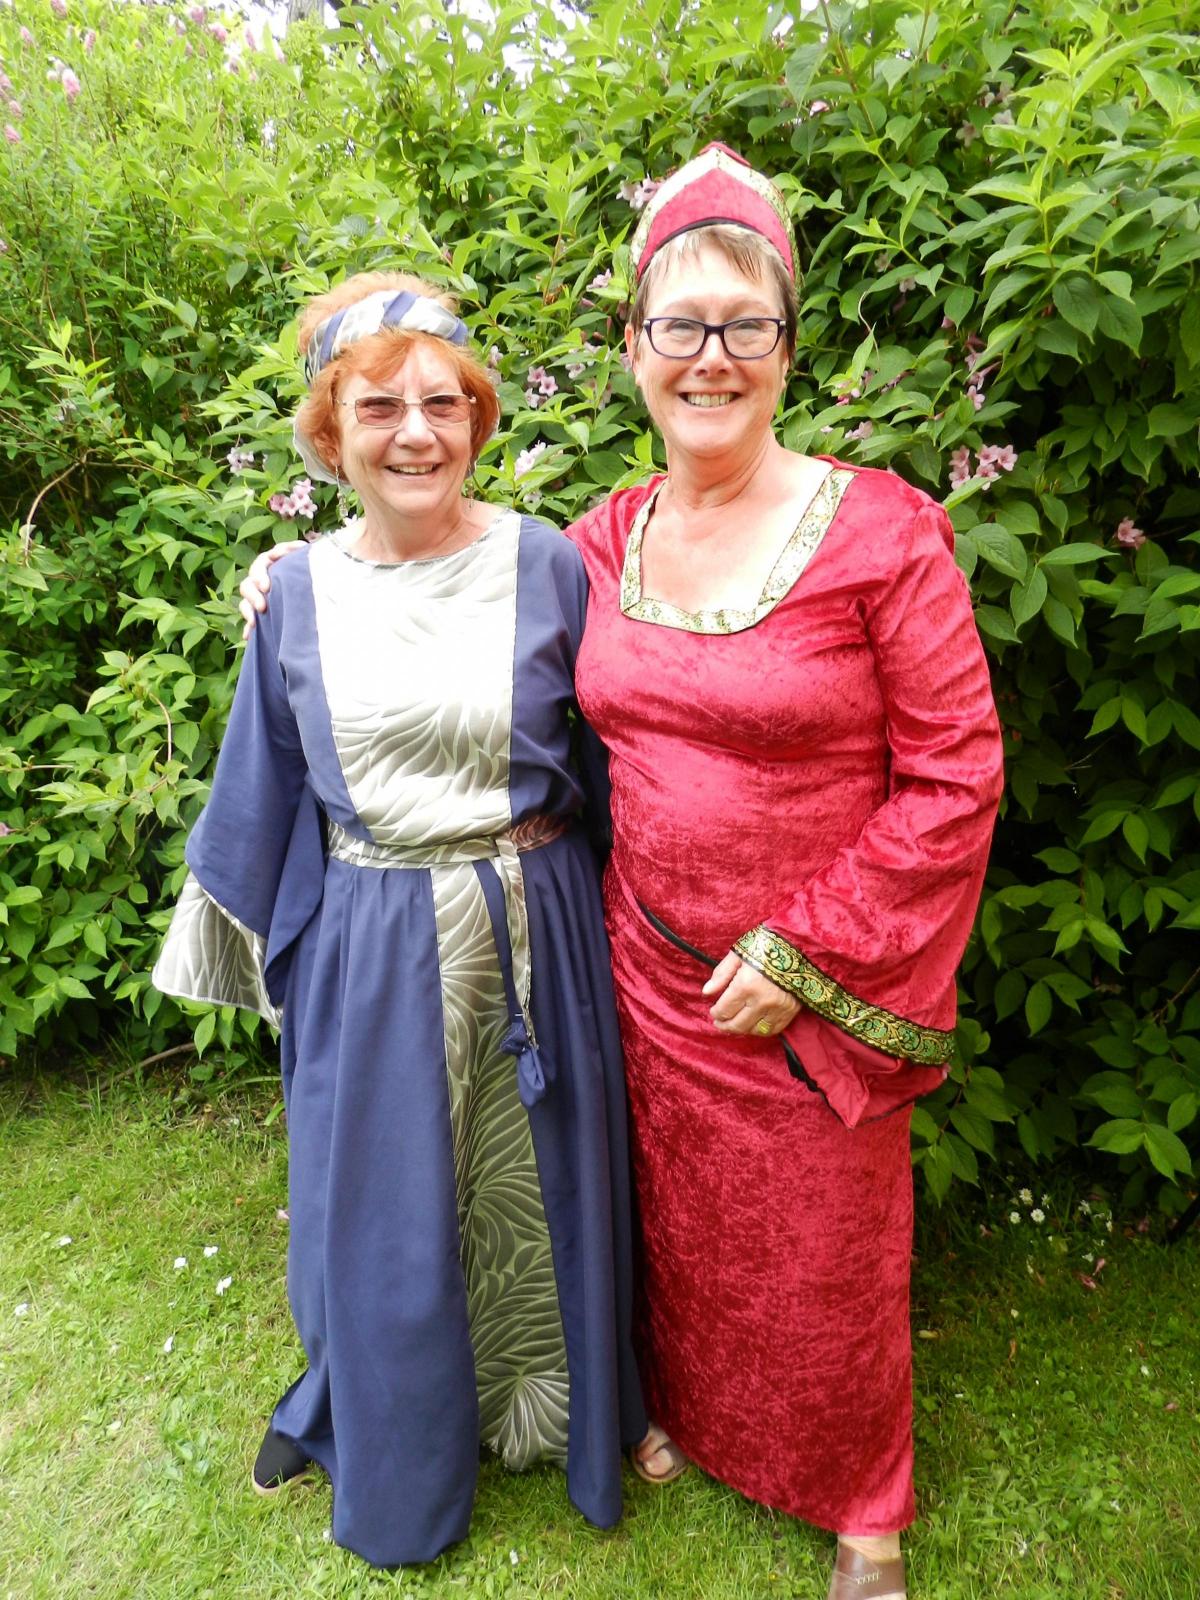 Jennie Darnley and Maureen Molyneux  at Llandstadwell Medieval Fayre, Saturday June 20, 2015. 
PICTURE: Western Telegraph/Milford Mercury